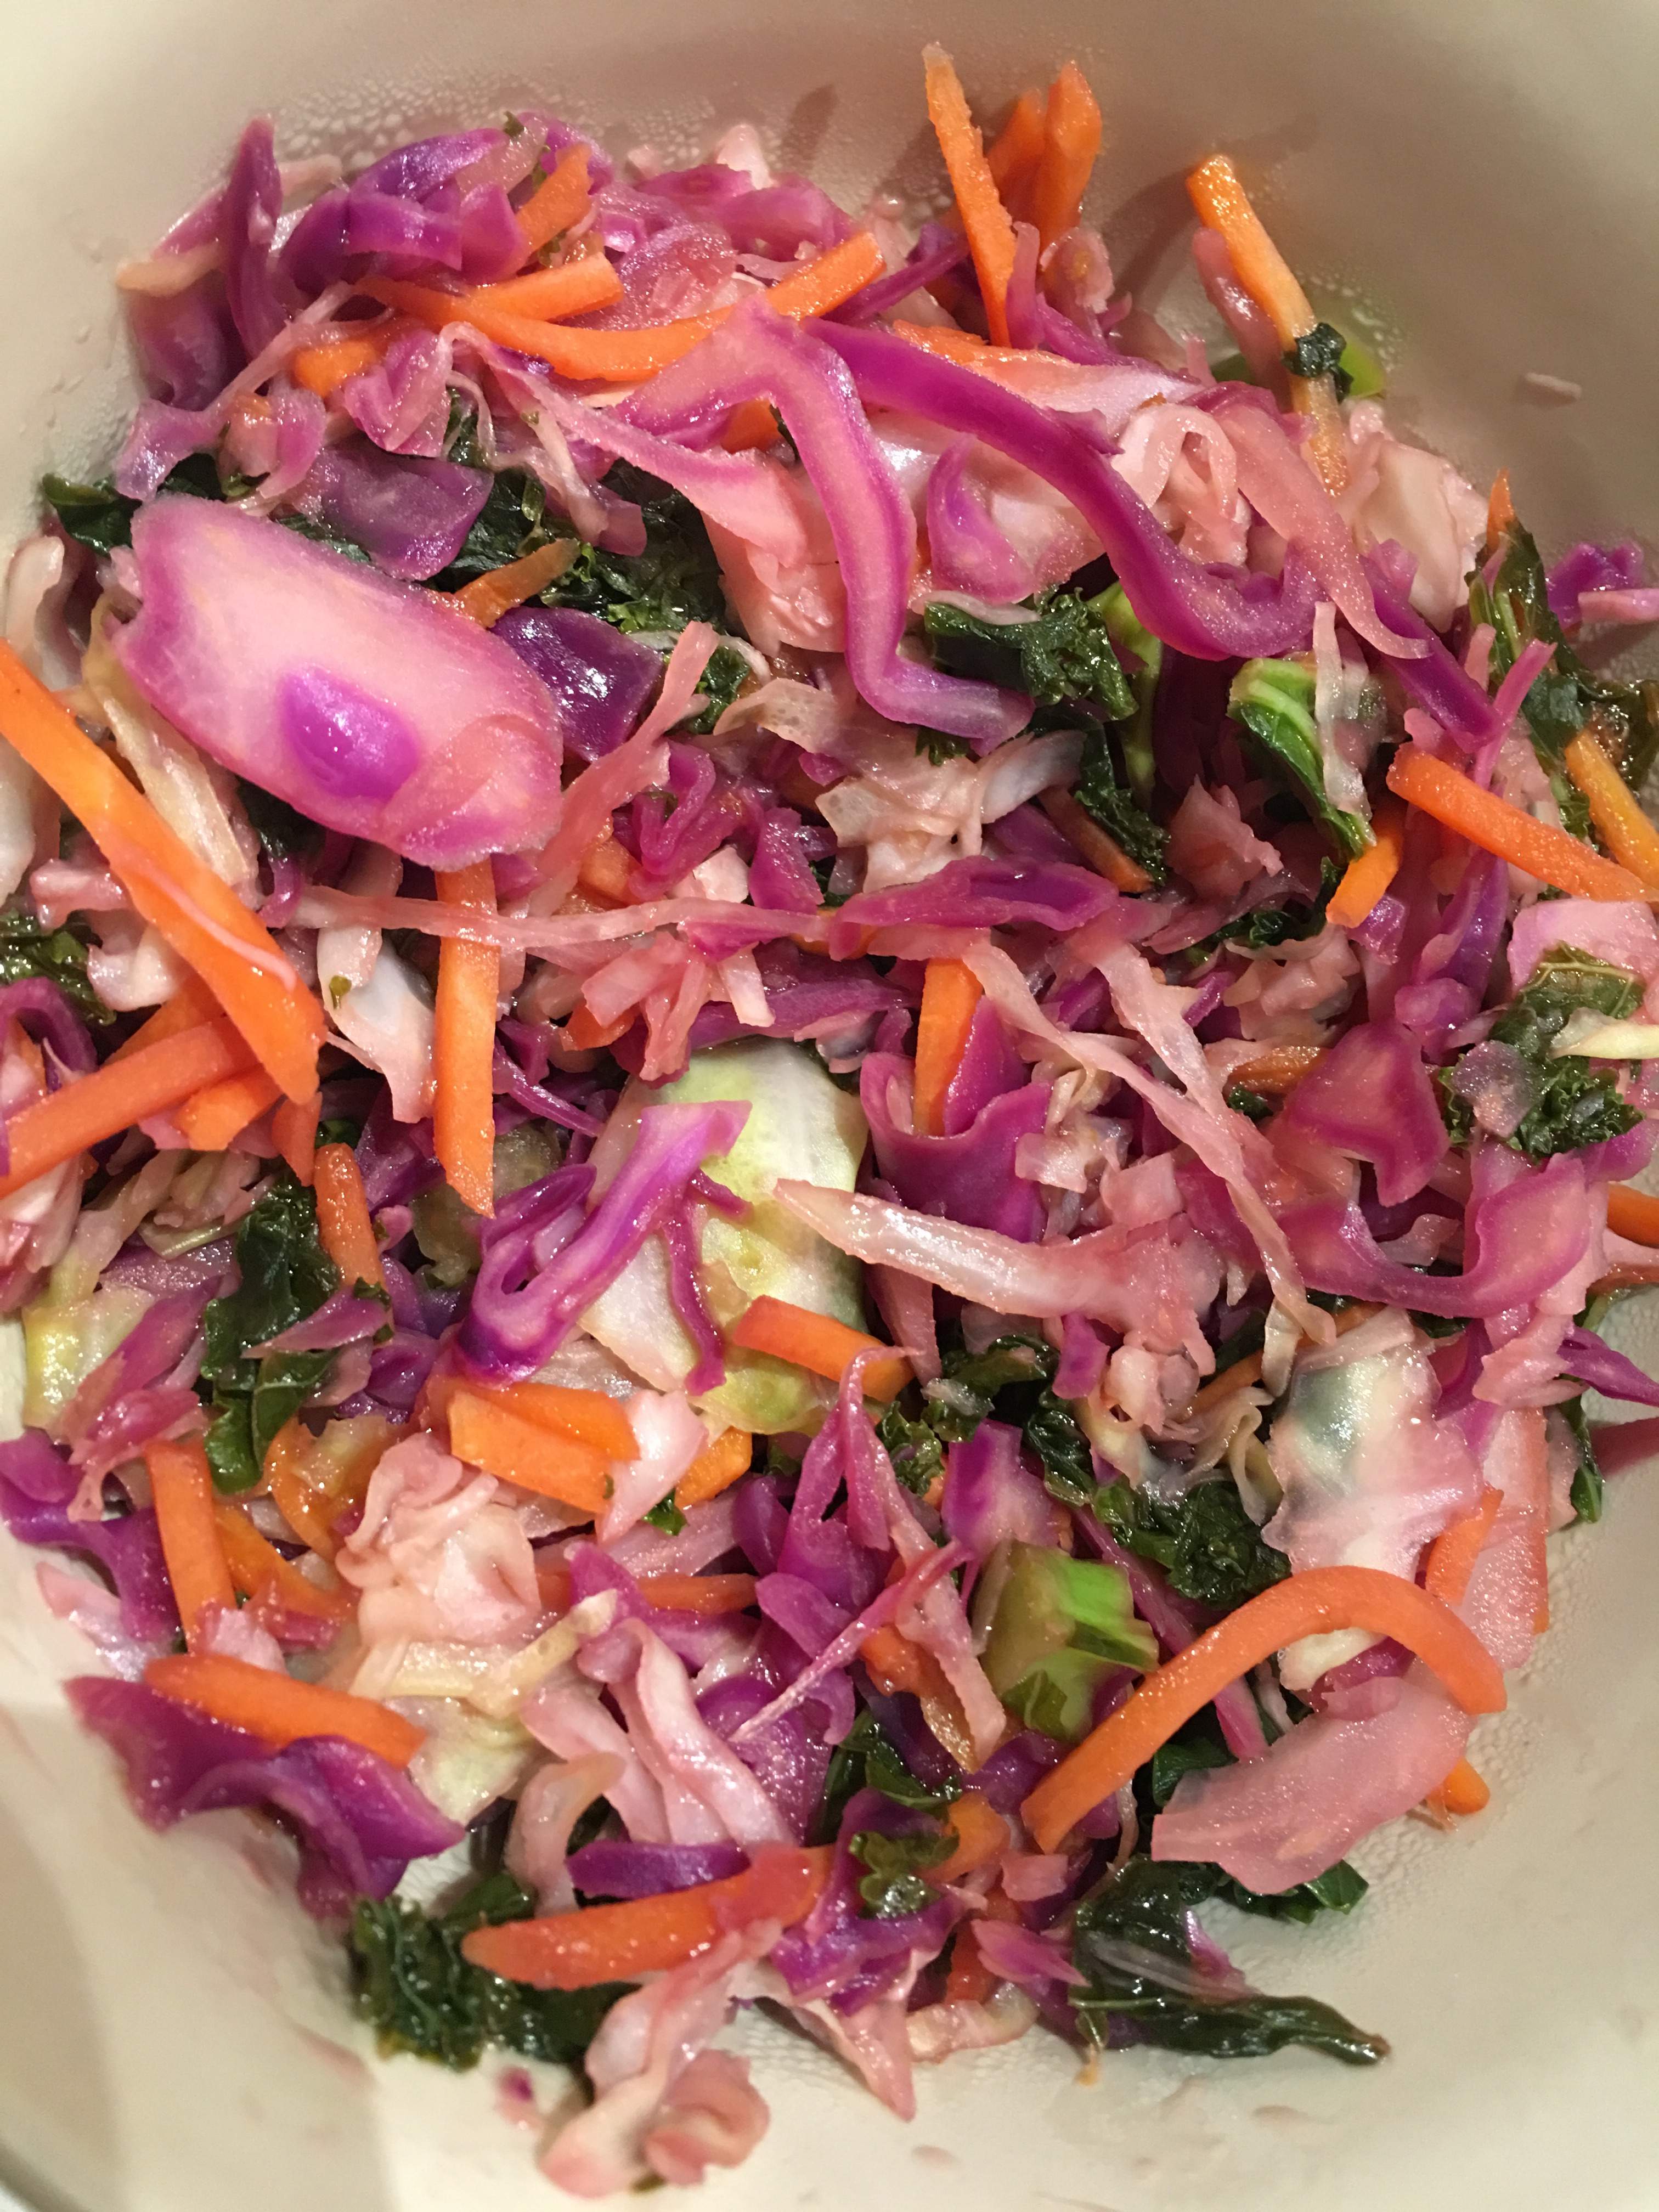 Cooked Cabbage Kale And Carrot Slaw Recipe Worldrd By Layne Lieberman Rd,Creamsicle Shot